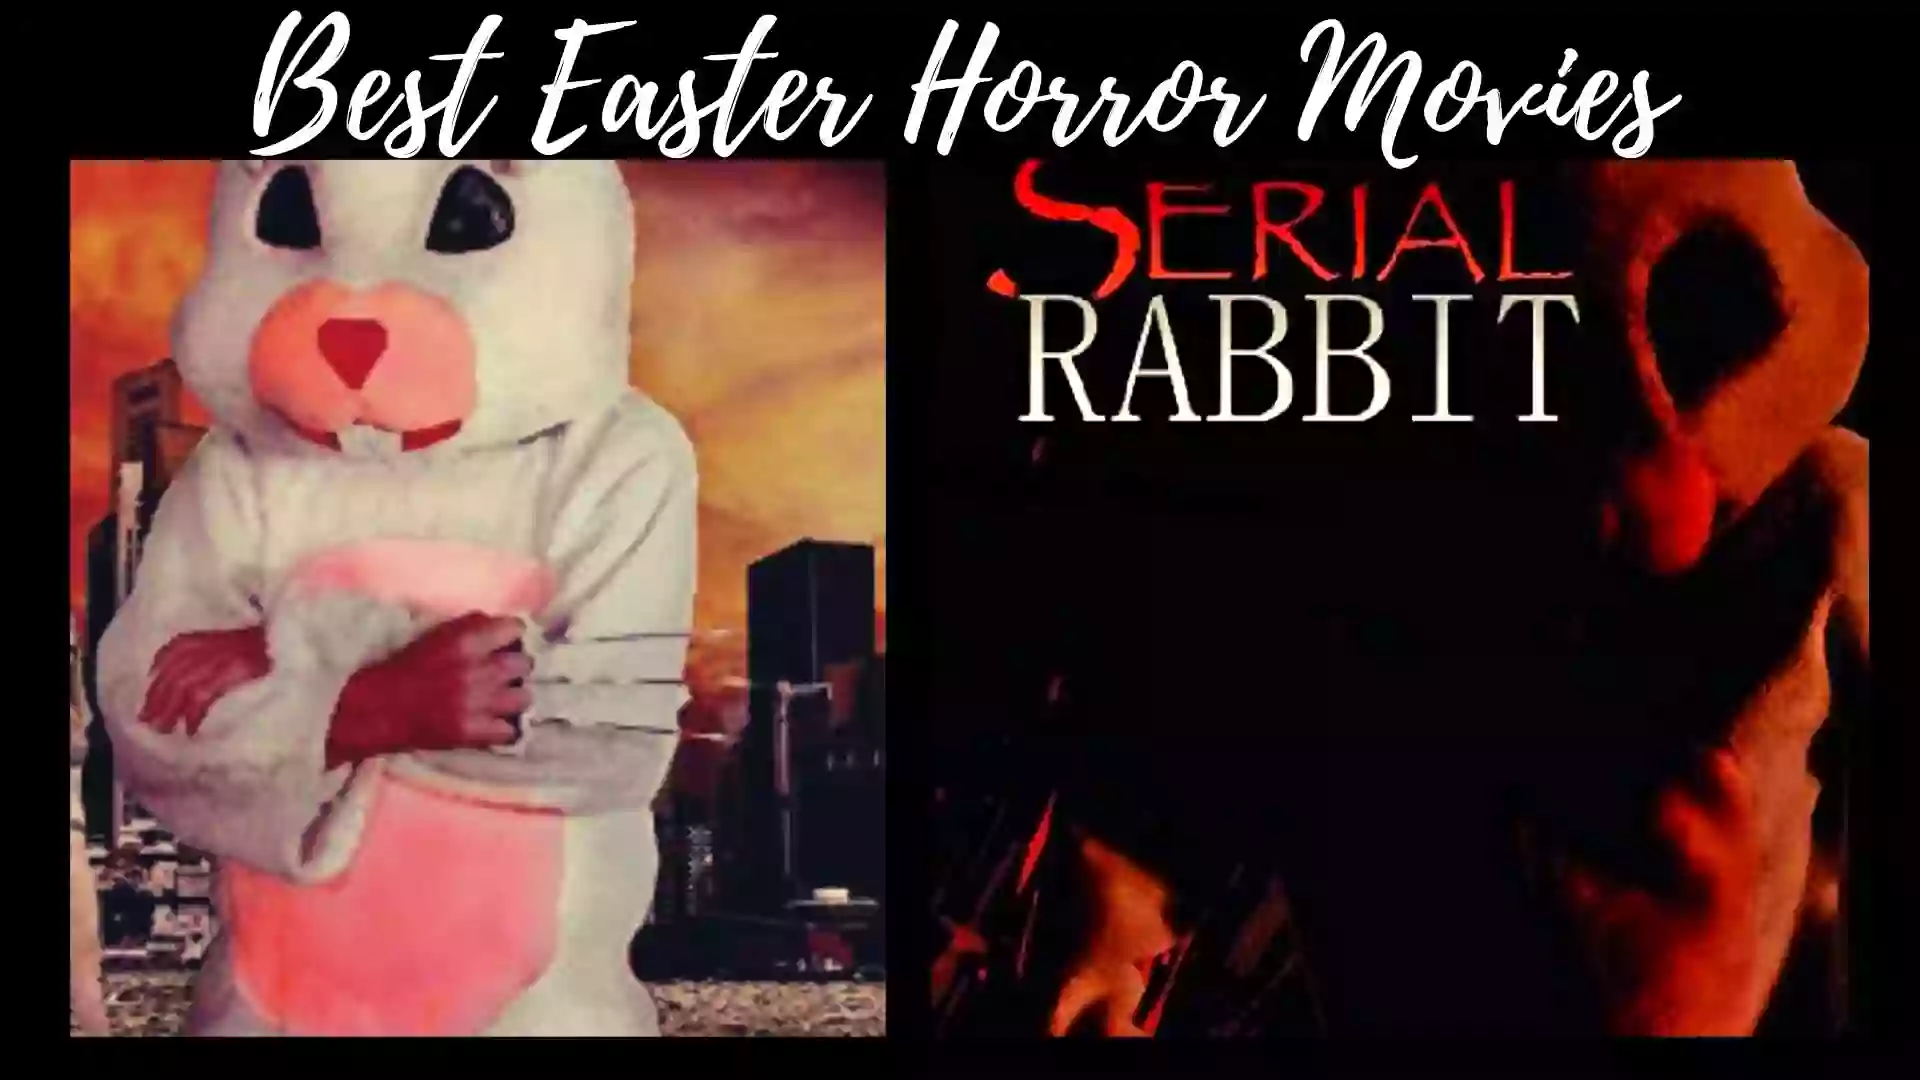 Best Easter Horror Movies